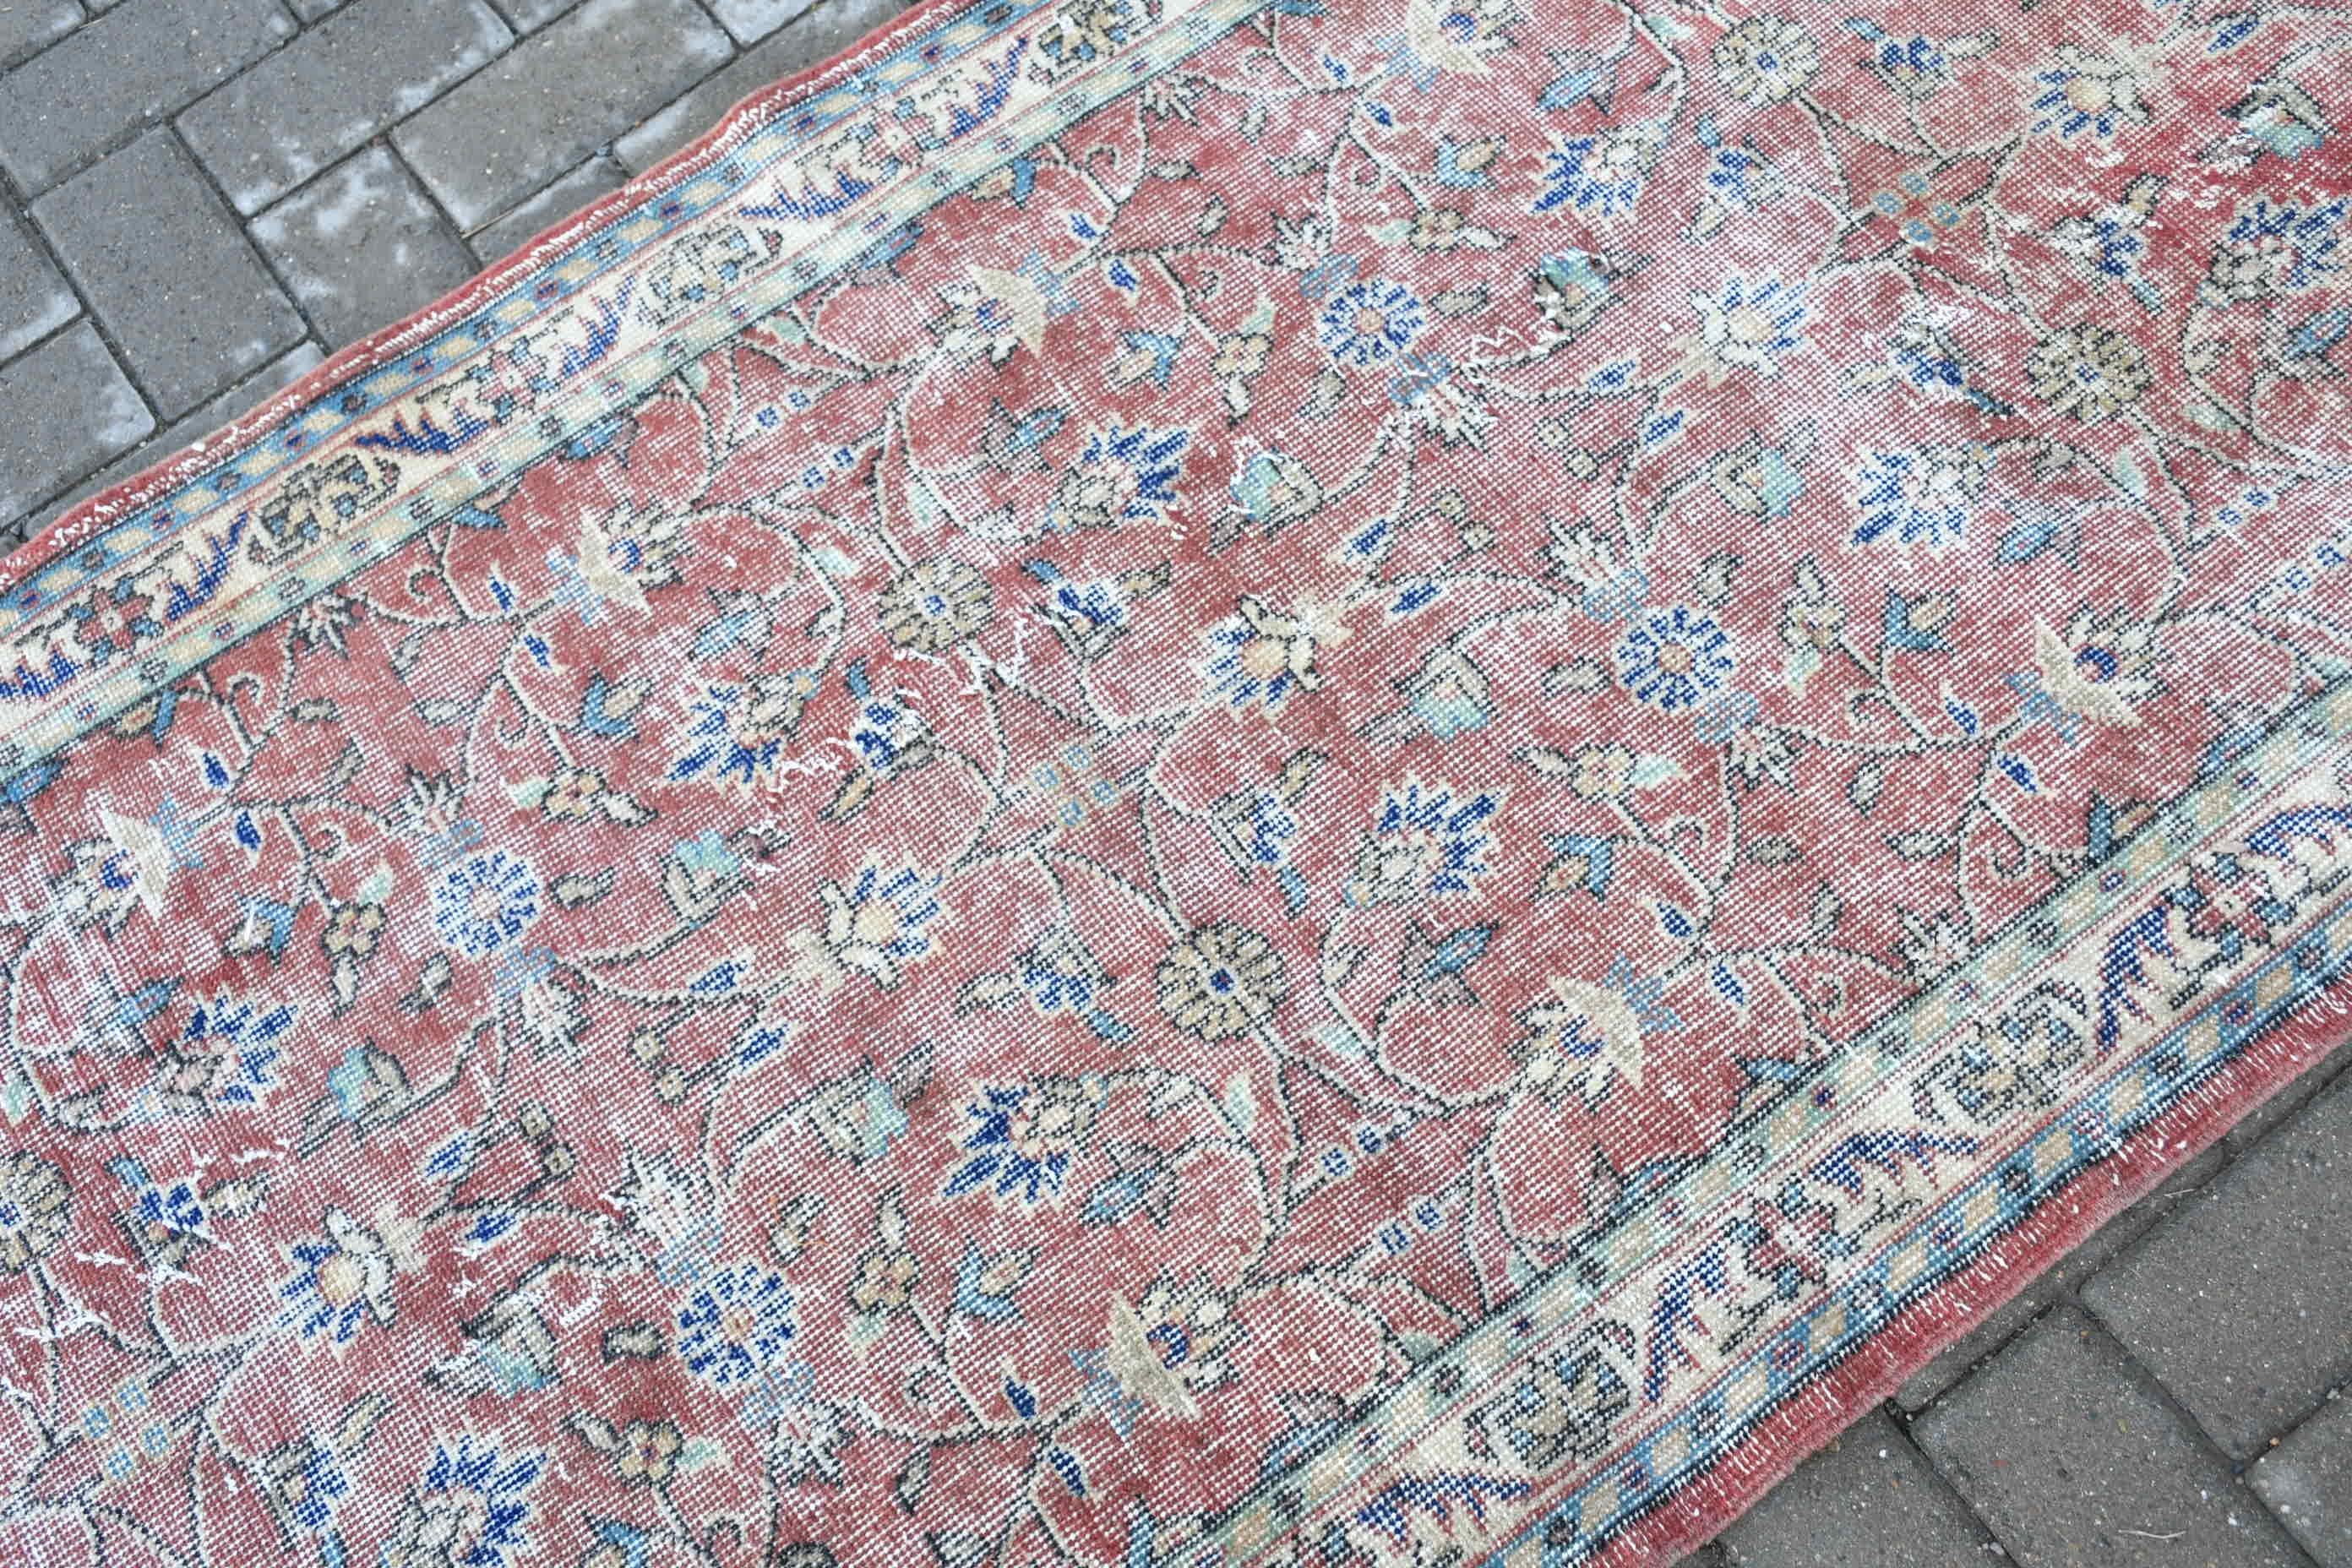 Rugs for Kitchen, Kitchen Rug, Red Oushak Rug, Bedroom Rug, Vintage Rugs, Turkish Rug, Cute Rug, 3.2x6.3 ft Accent Rugs